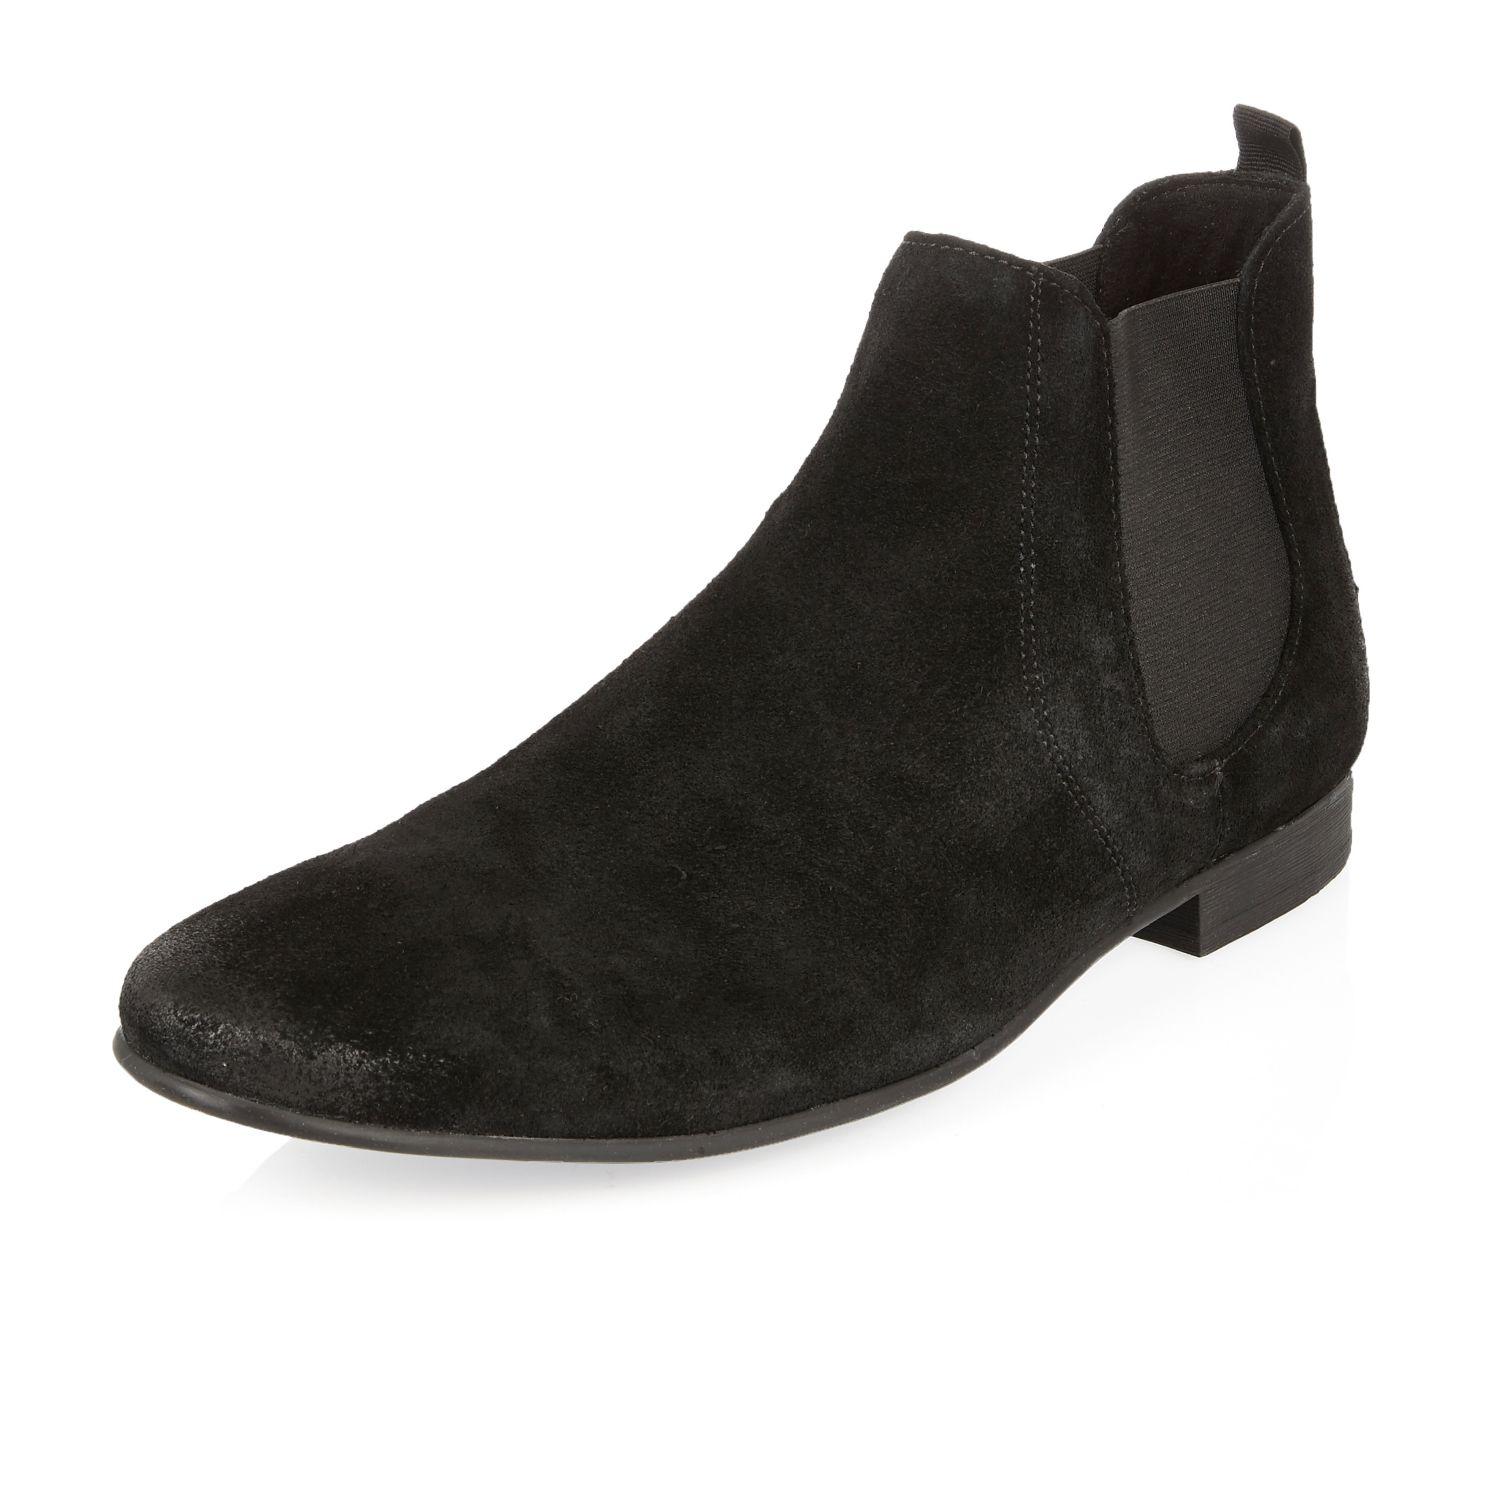 river island black suede chelsea boots